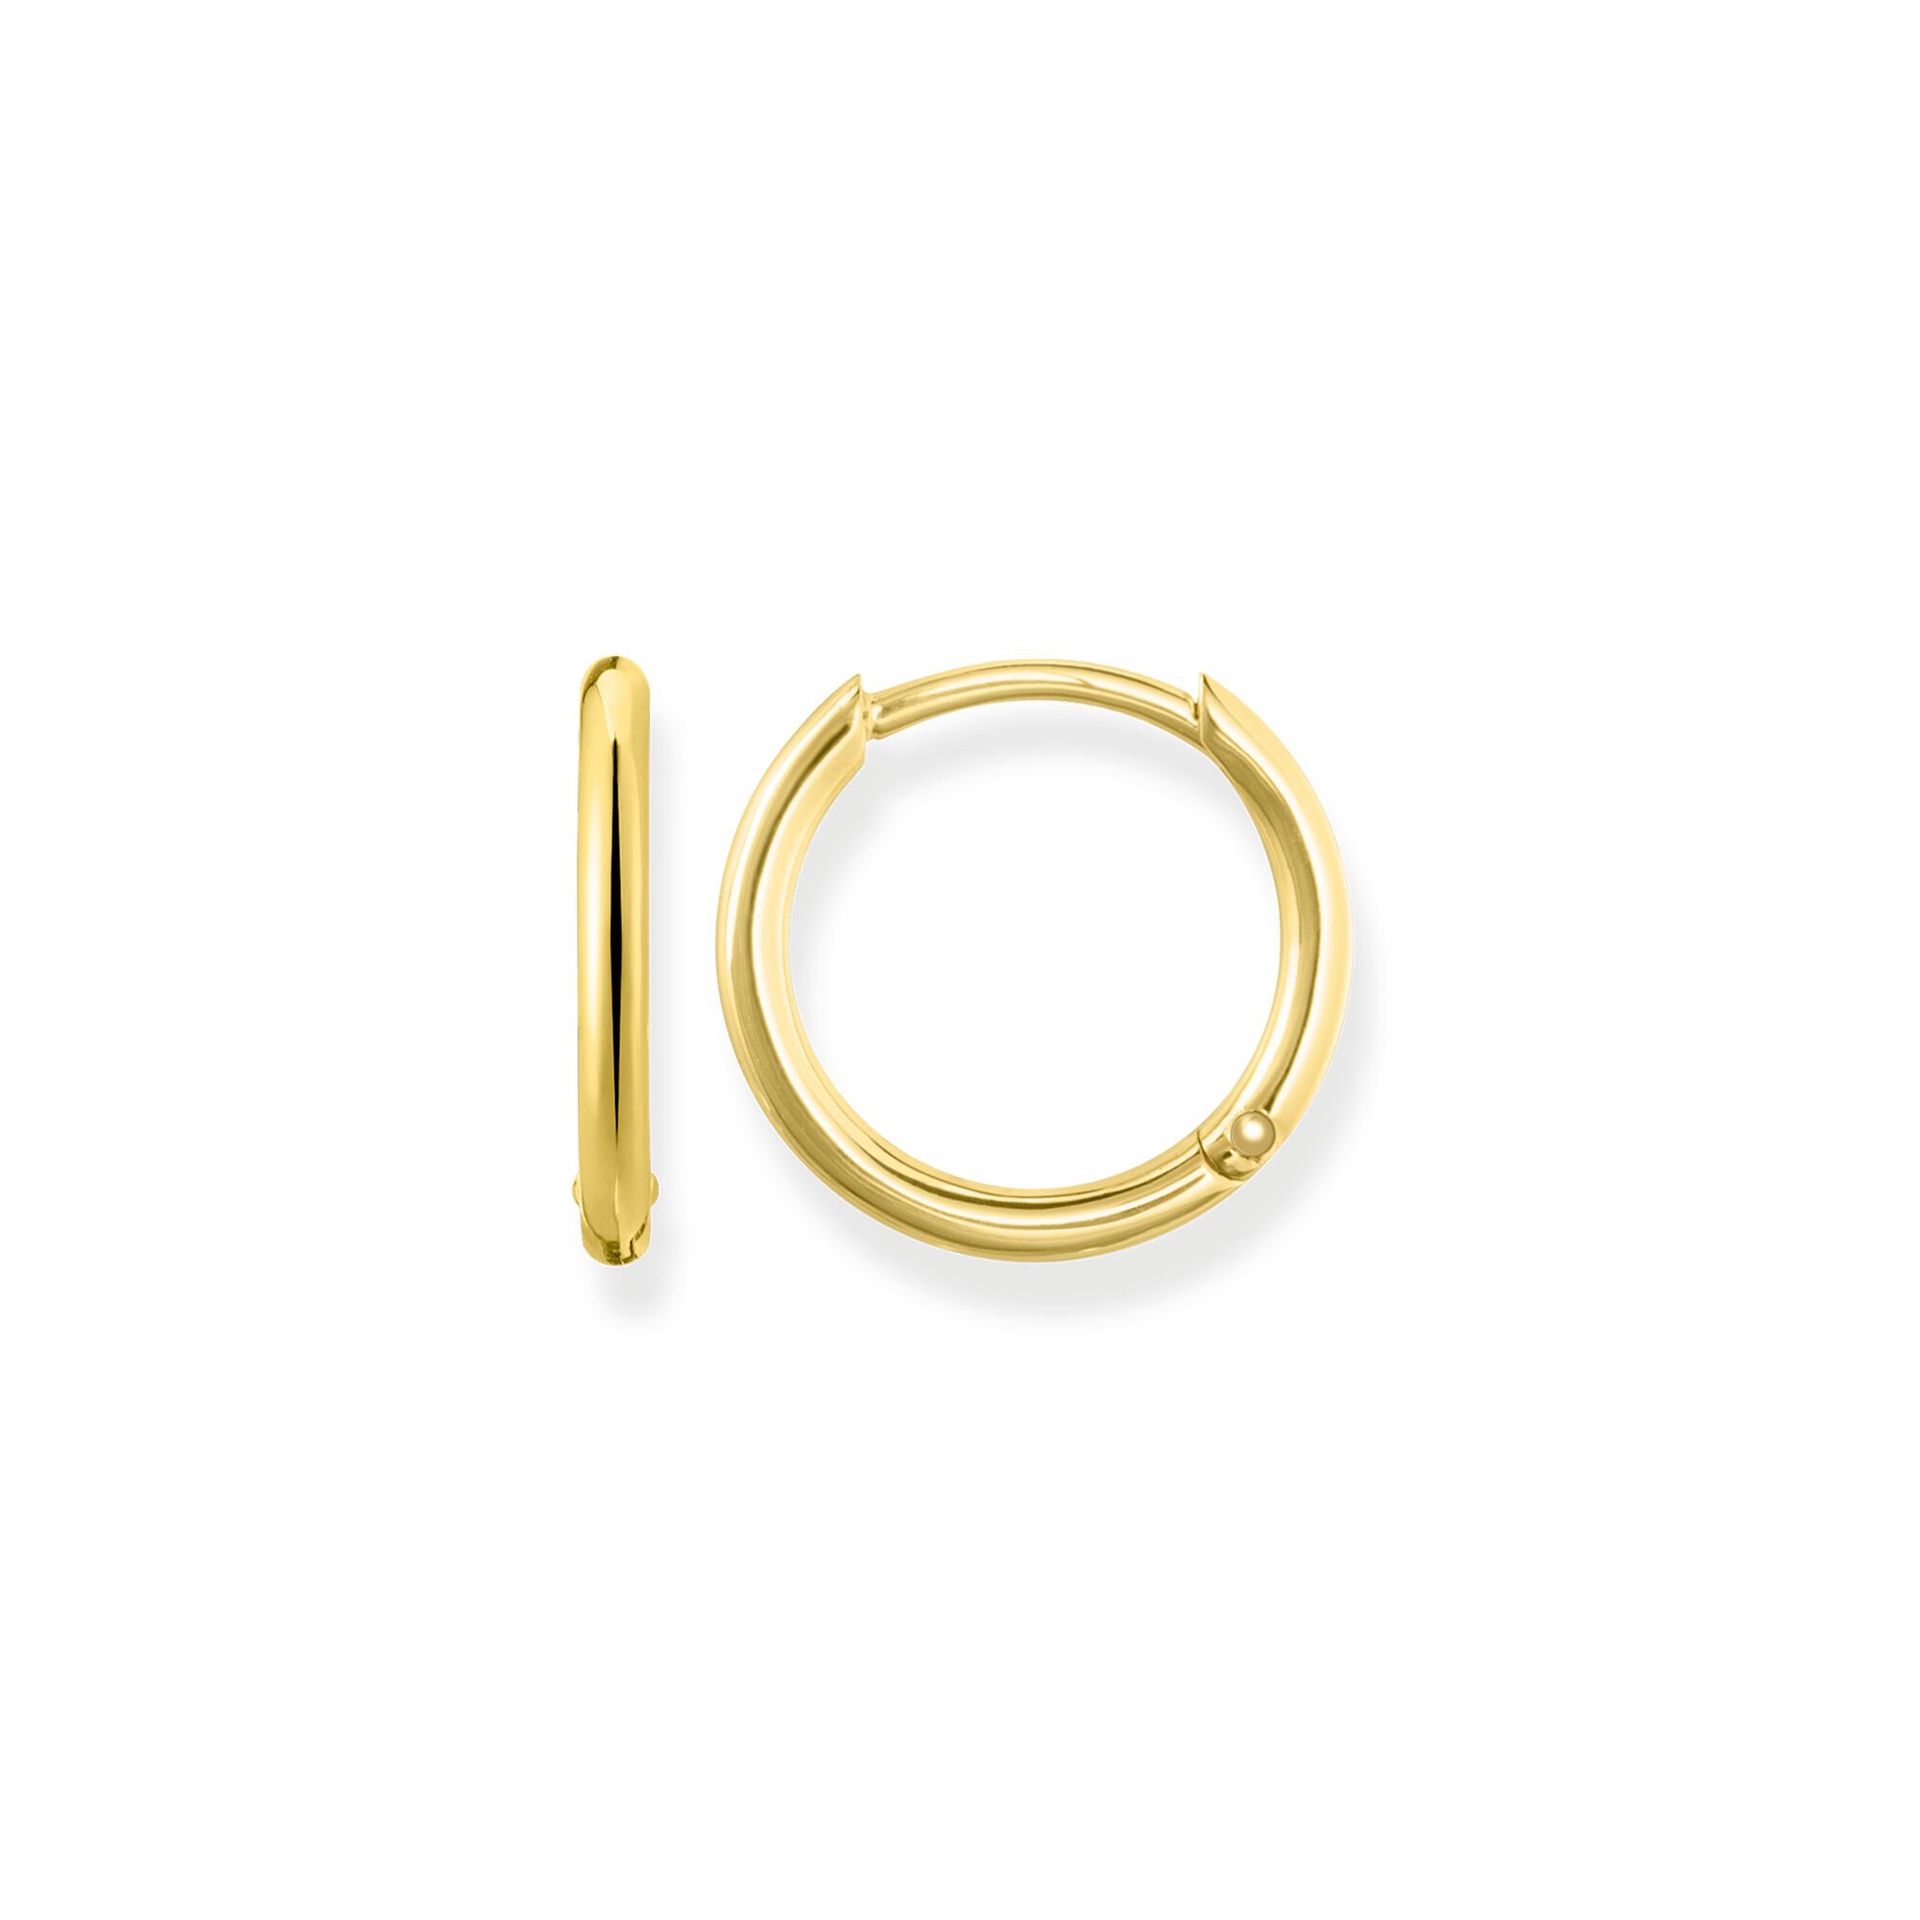 Buy Thomas Sabo Classic Small Hoop Earrings - Yellow Gold Online